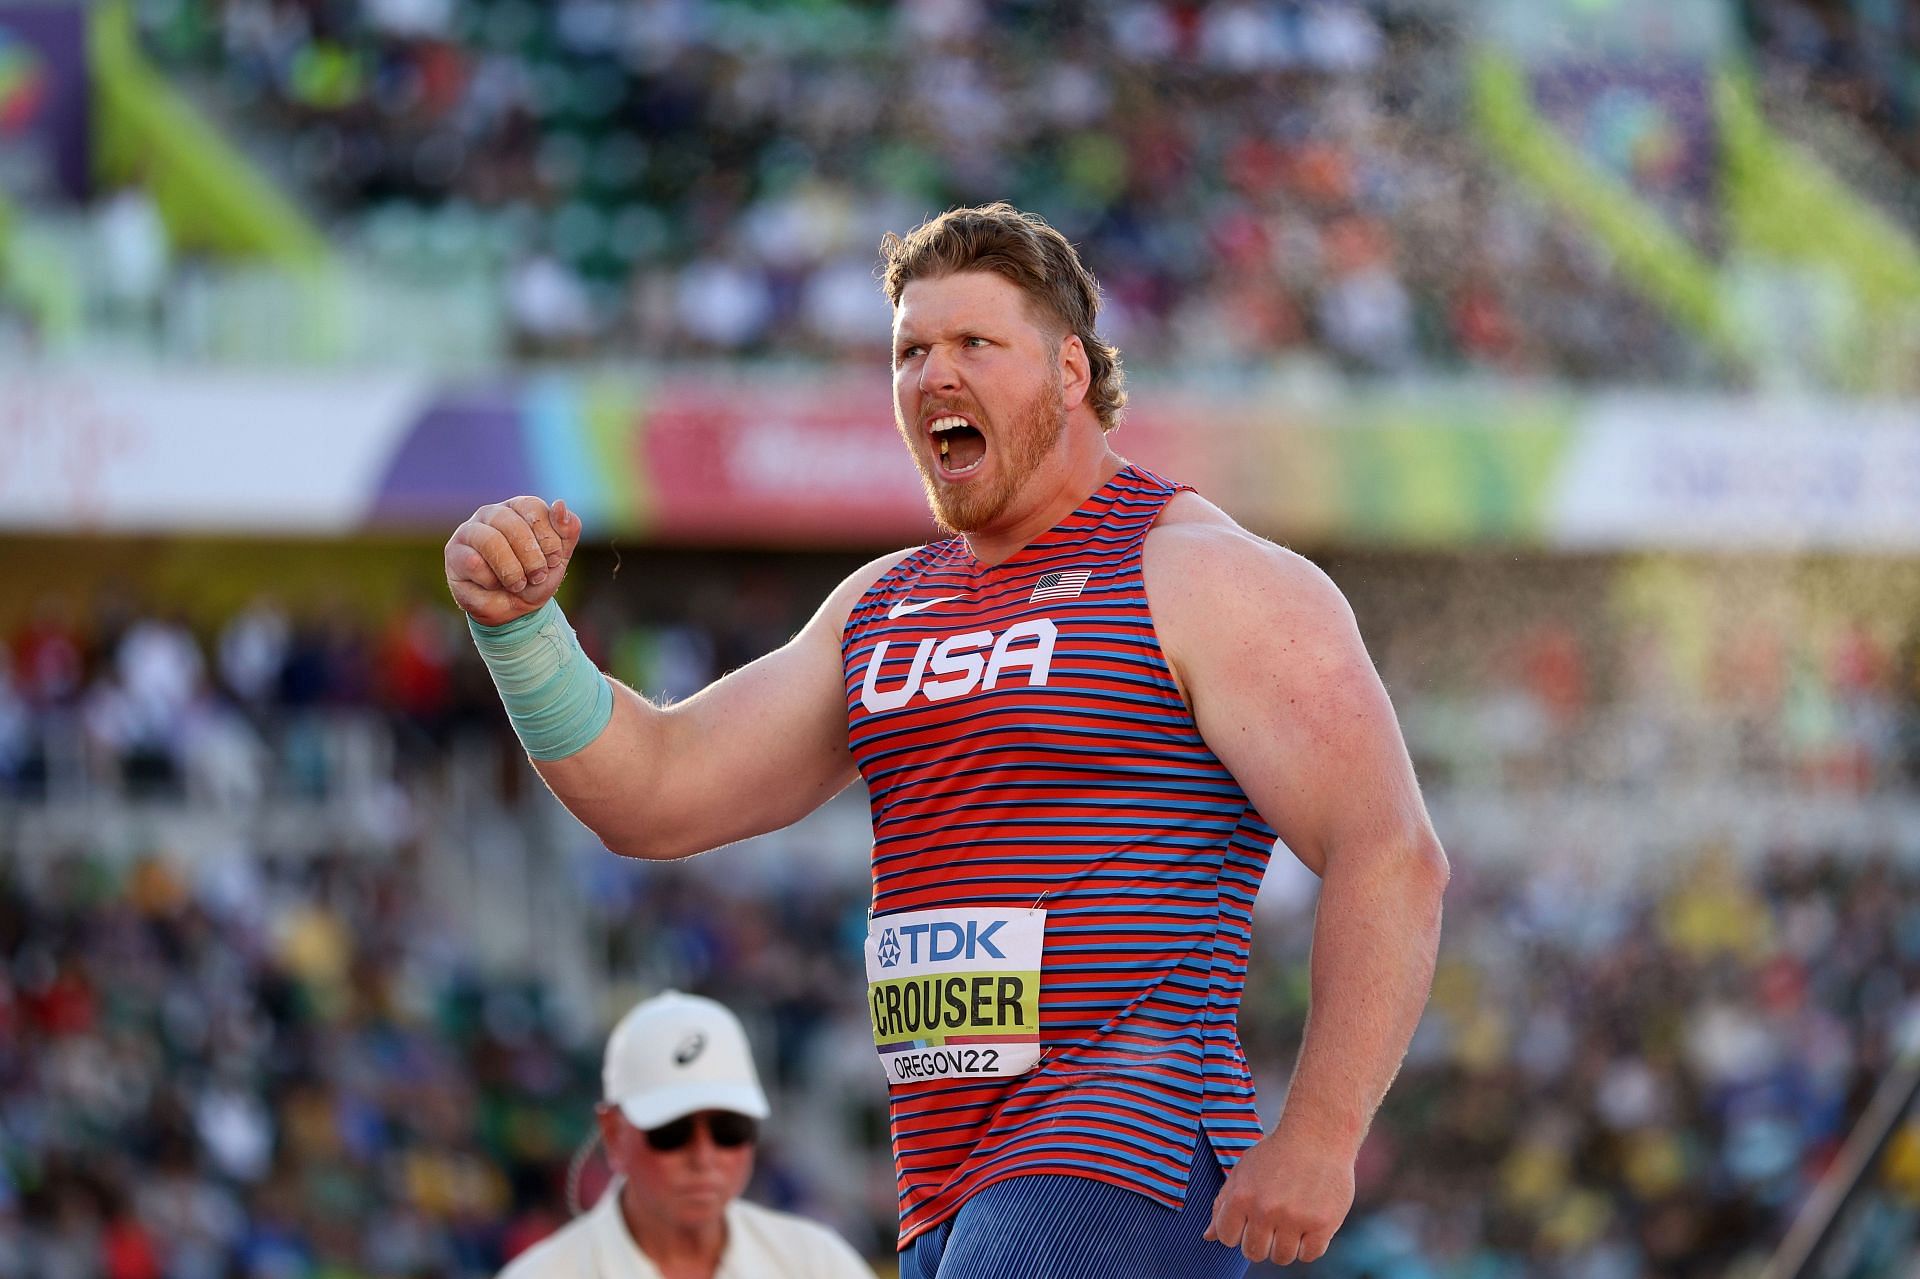 Ryan Crouser, the outdoor world record holder in shot put, will also be in action on Day 1 of the World Athletics Indoor Championships 2024. (Photo by Ezra Shaw/Getty Images)